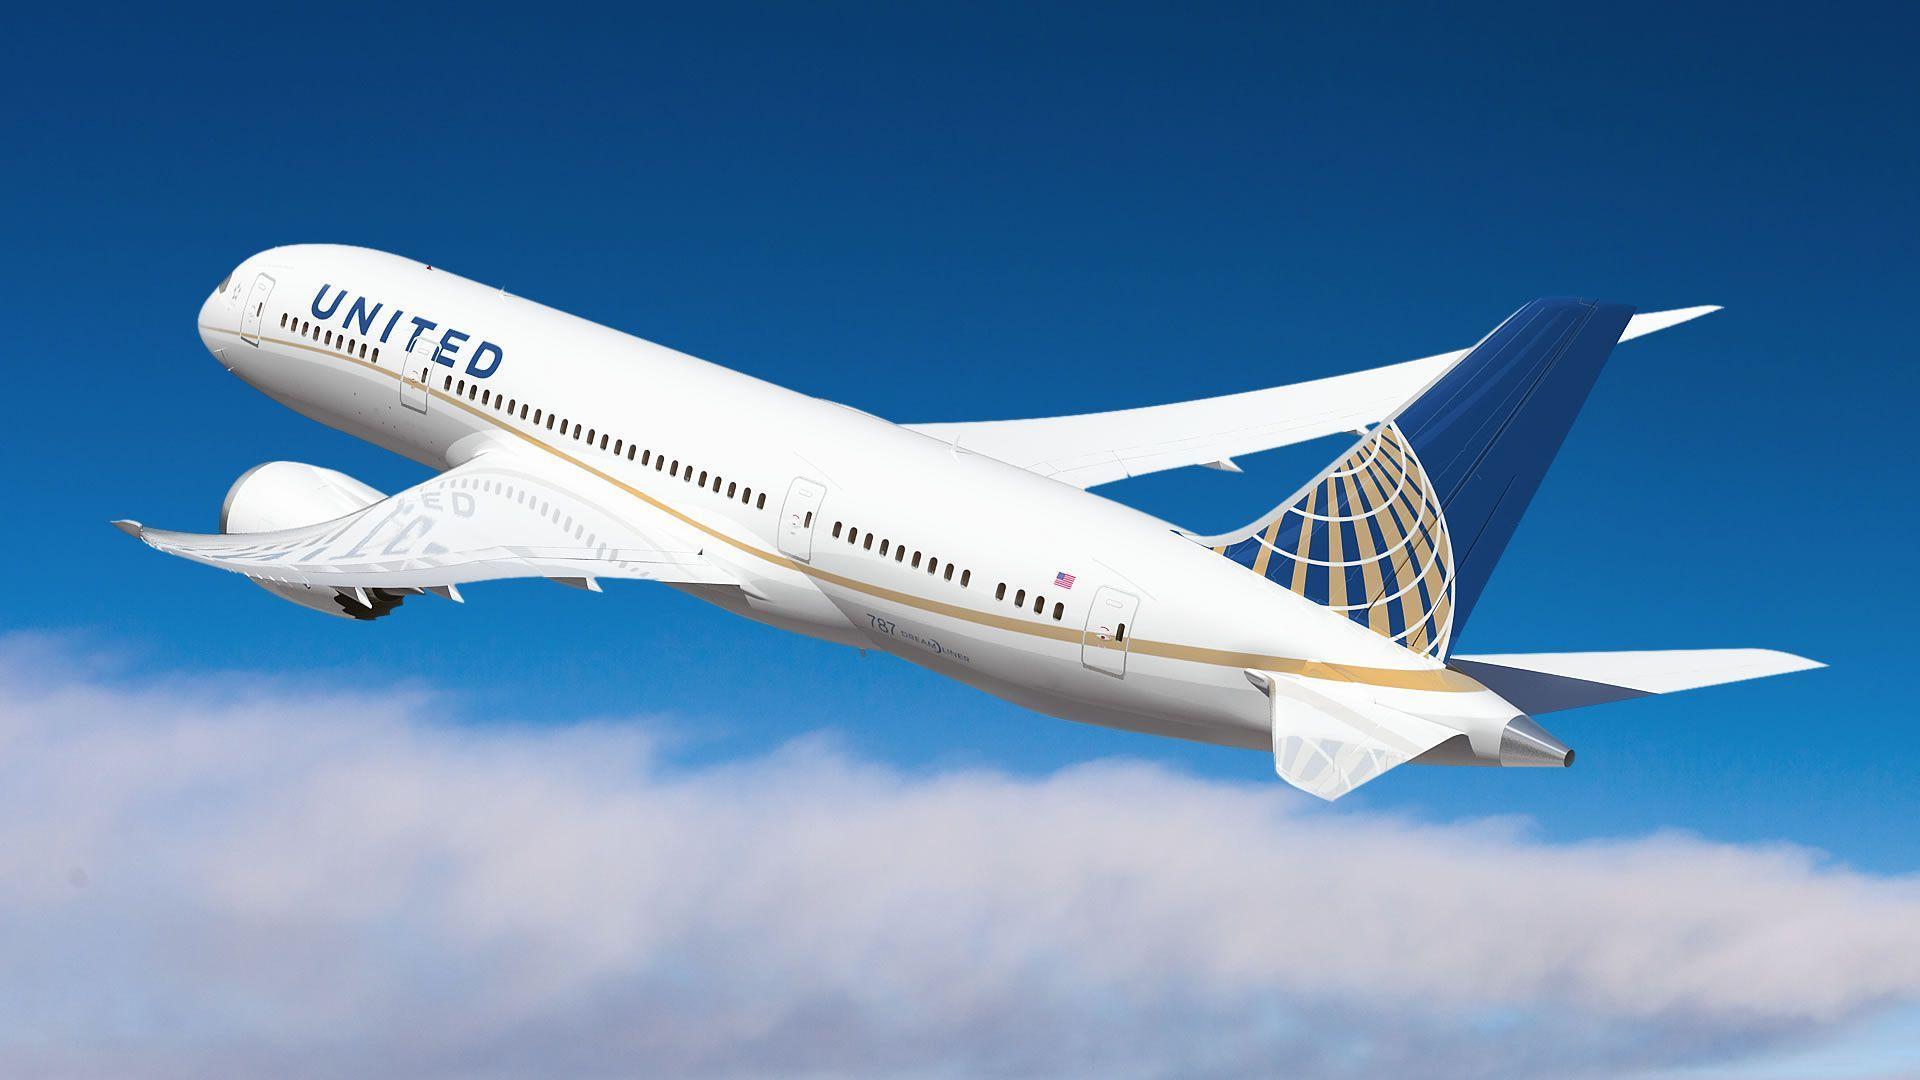 United Airlines Wallpaper for Android